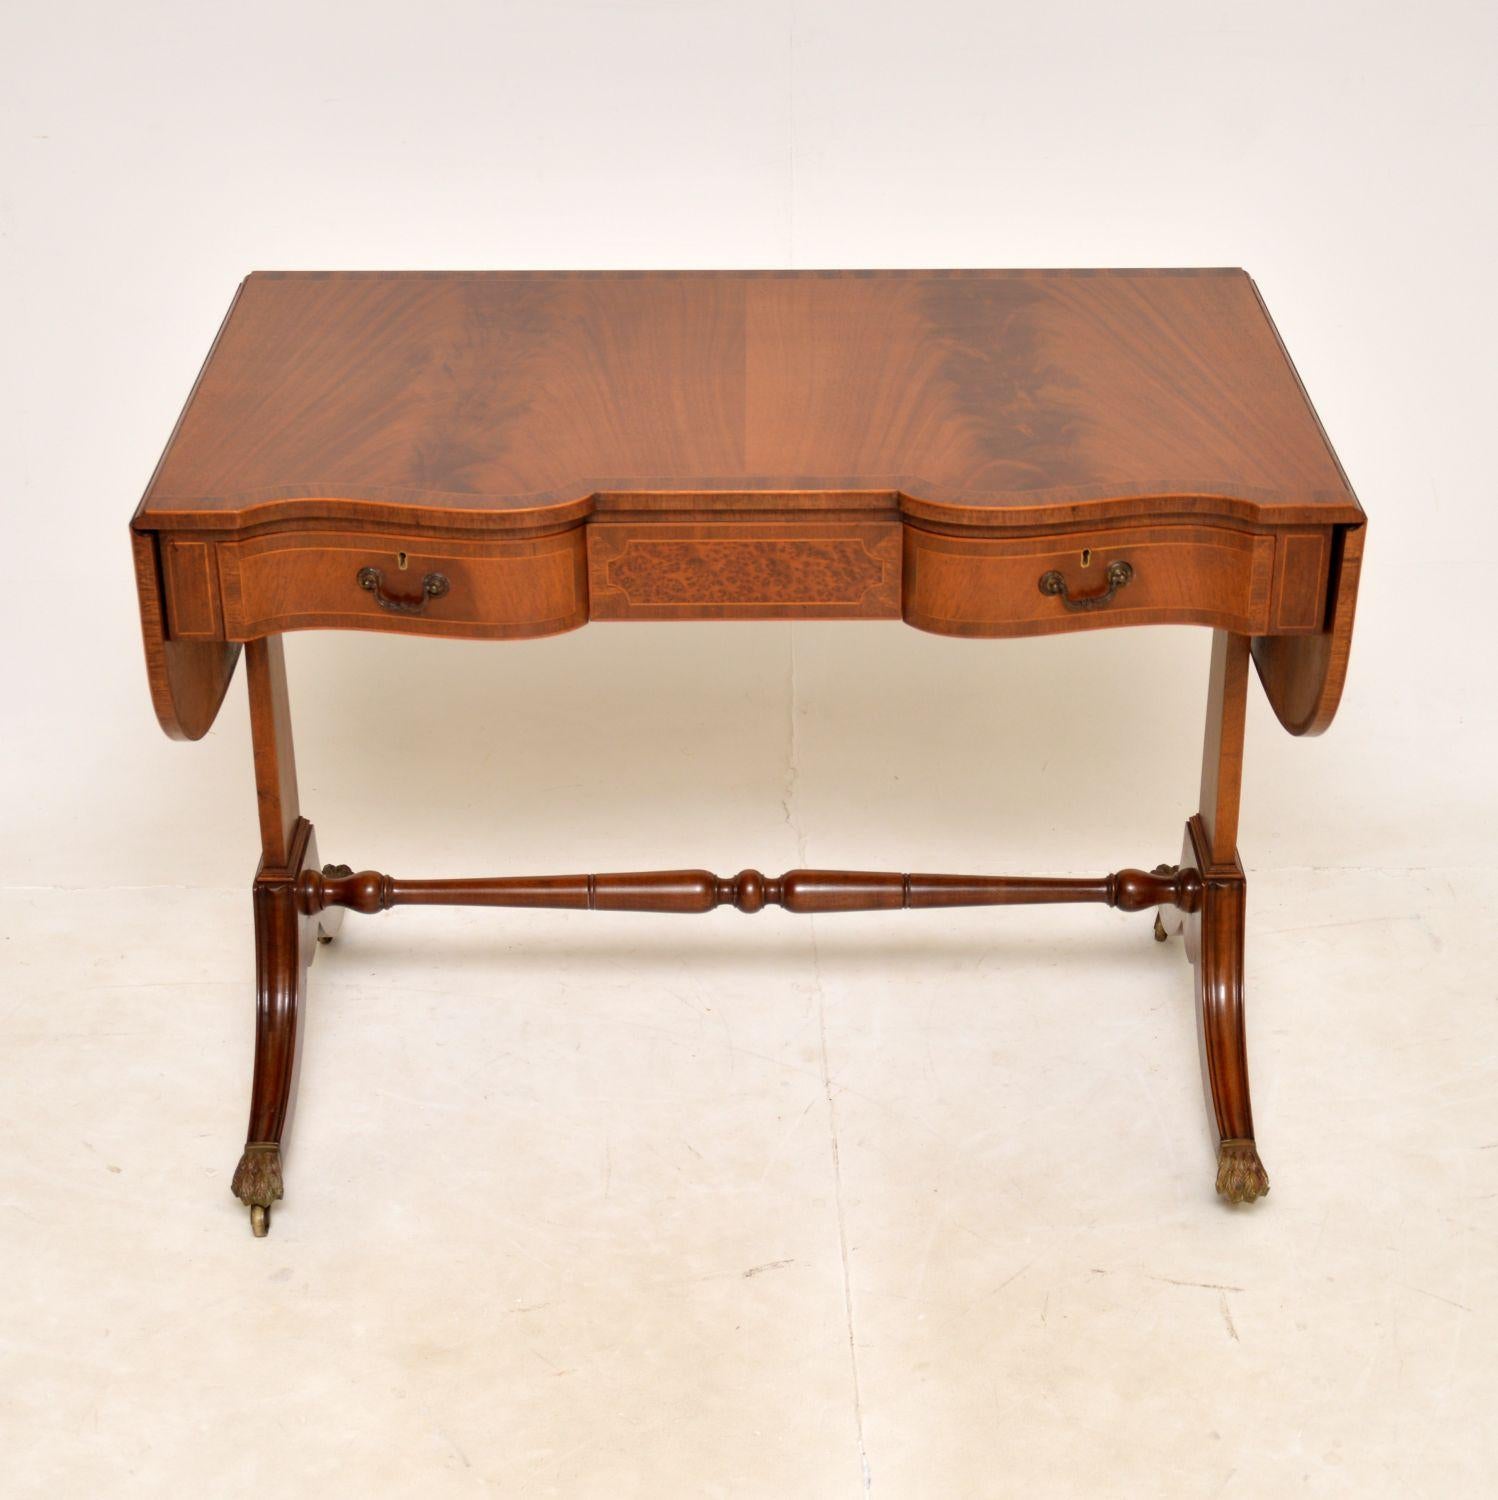 A smart and stylish antique drop leaf sofa table. This was made in England, it dates from around the 1920s.

It is of superb quality and has a gorgeous design. It is predominantly walnut, with cross banded edges and a bur yew central drawer front.